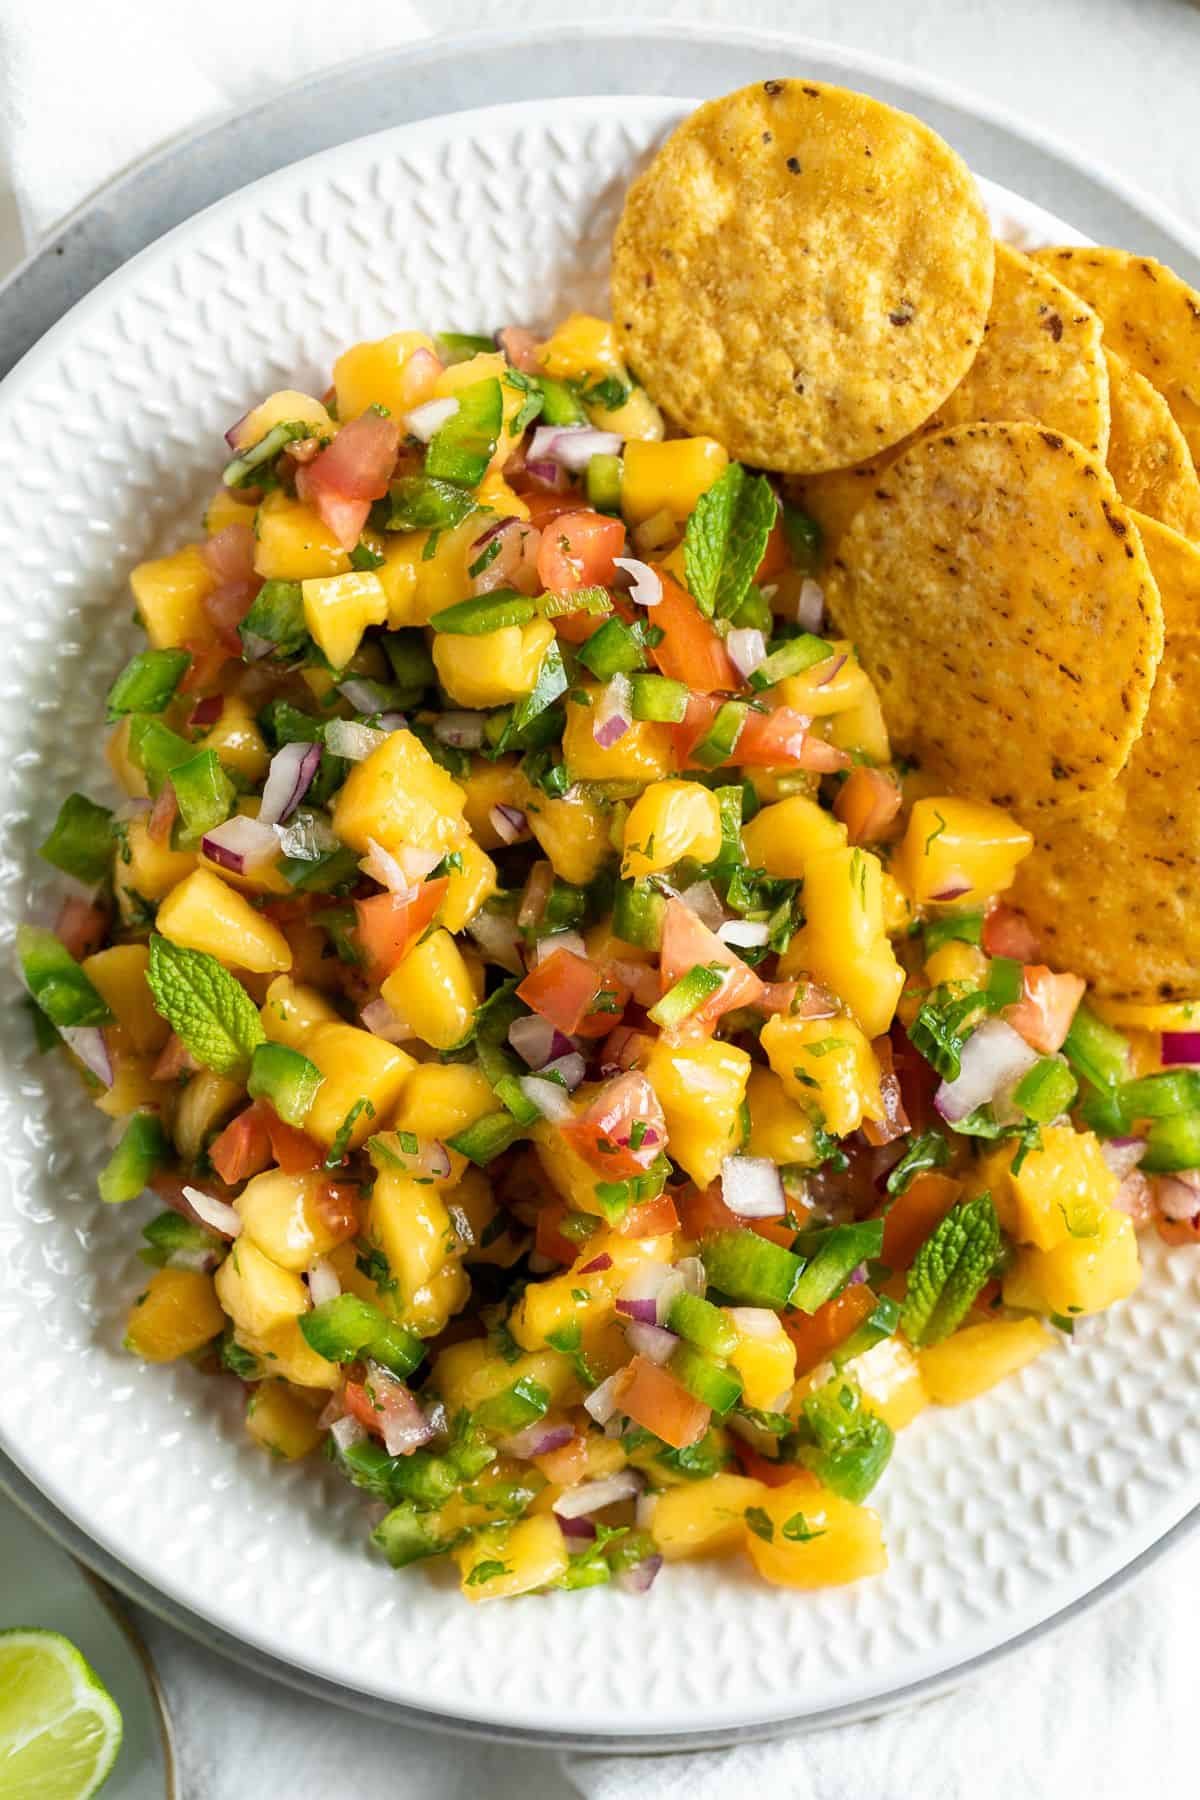 Round white dish of mango salsa with some corn chips on the edge.